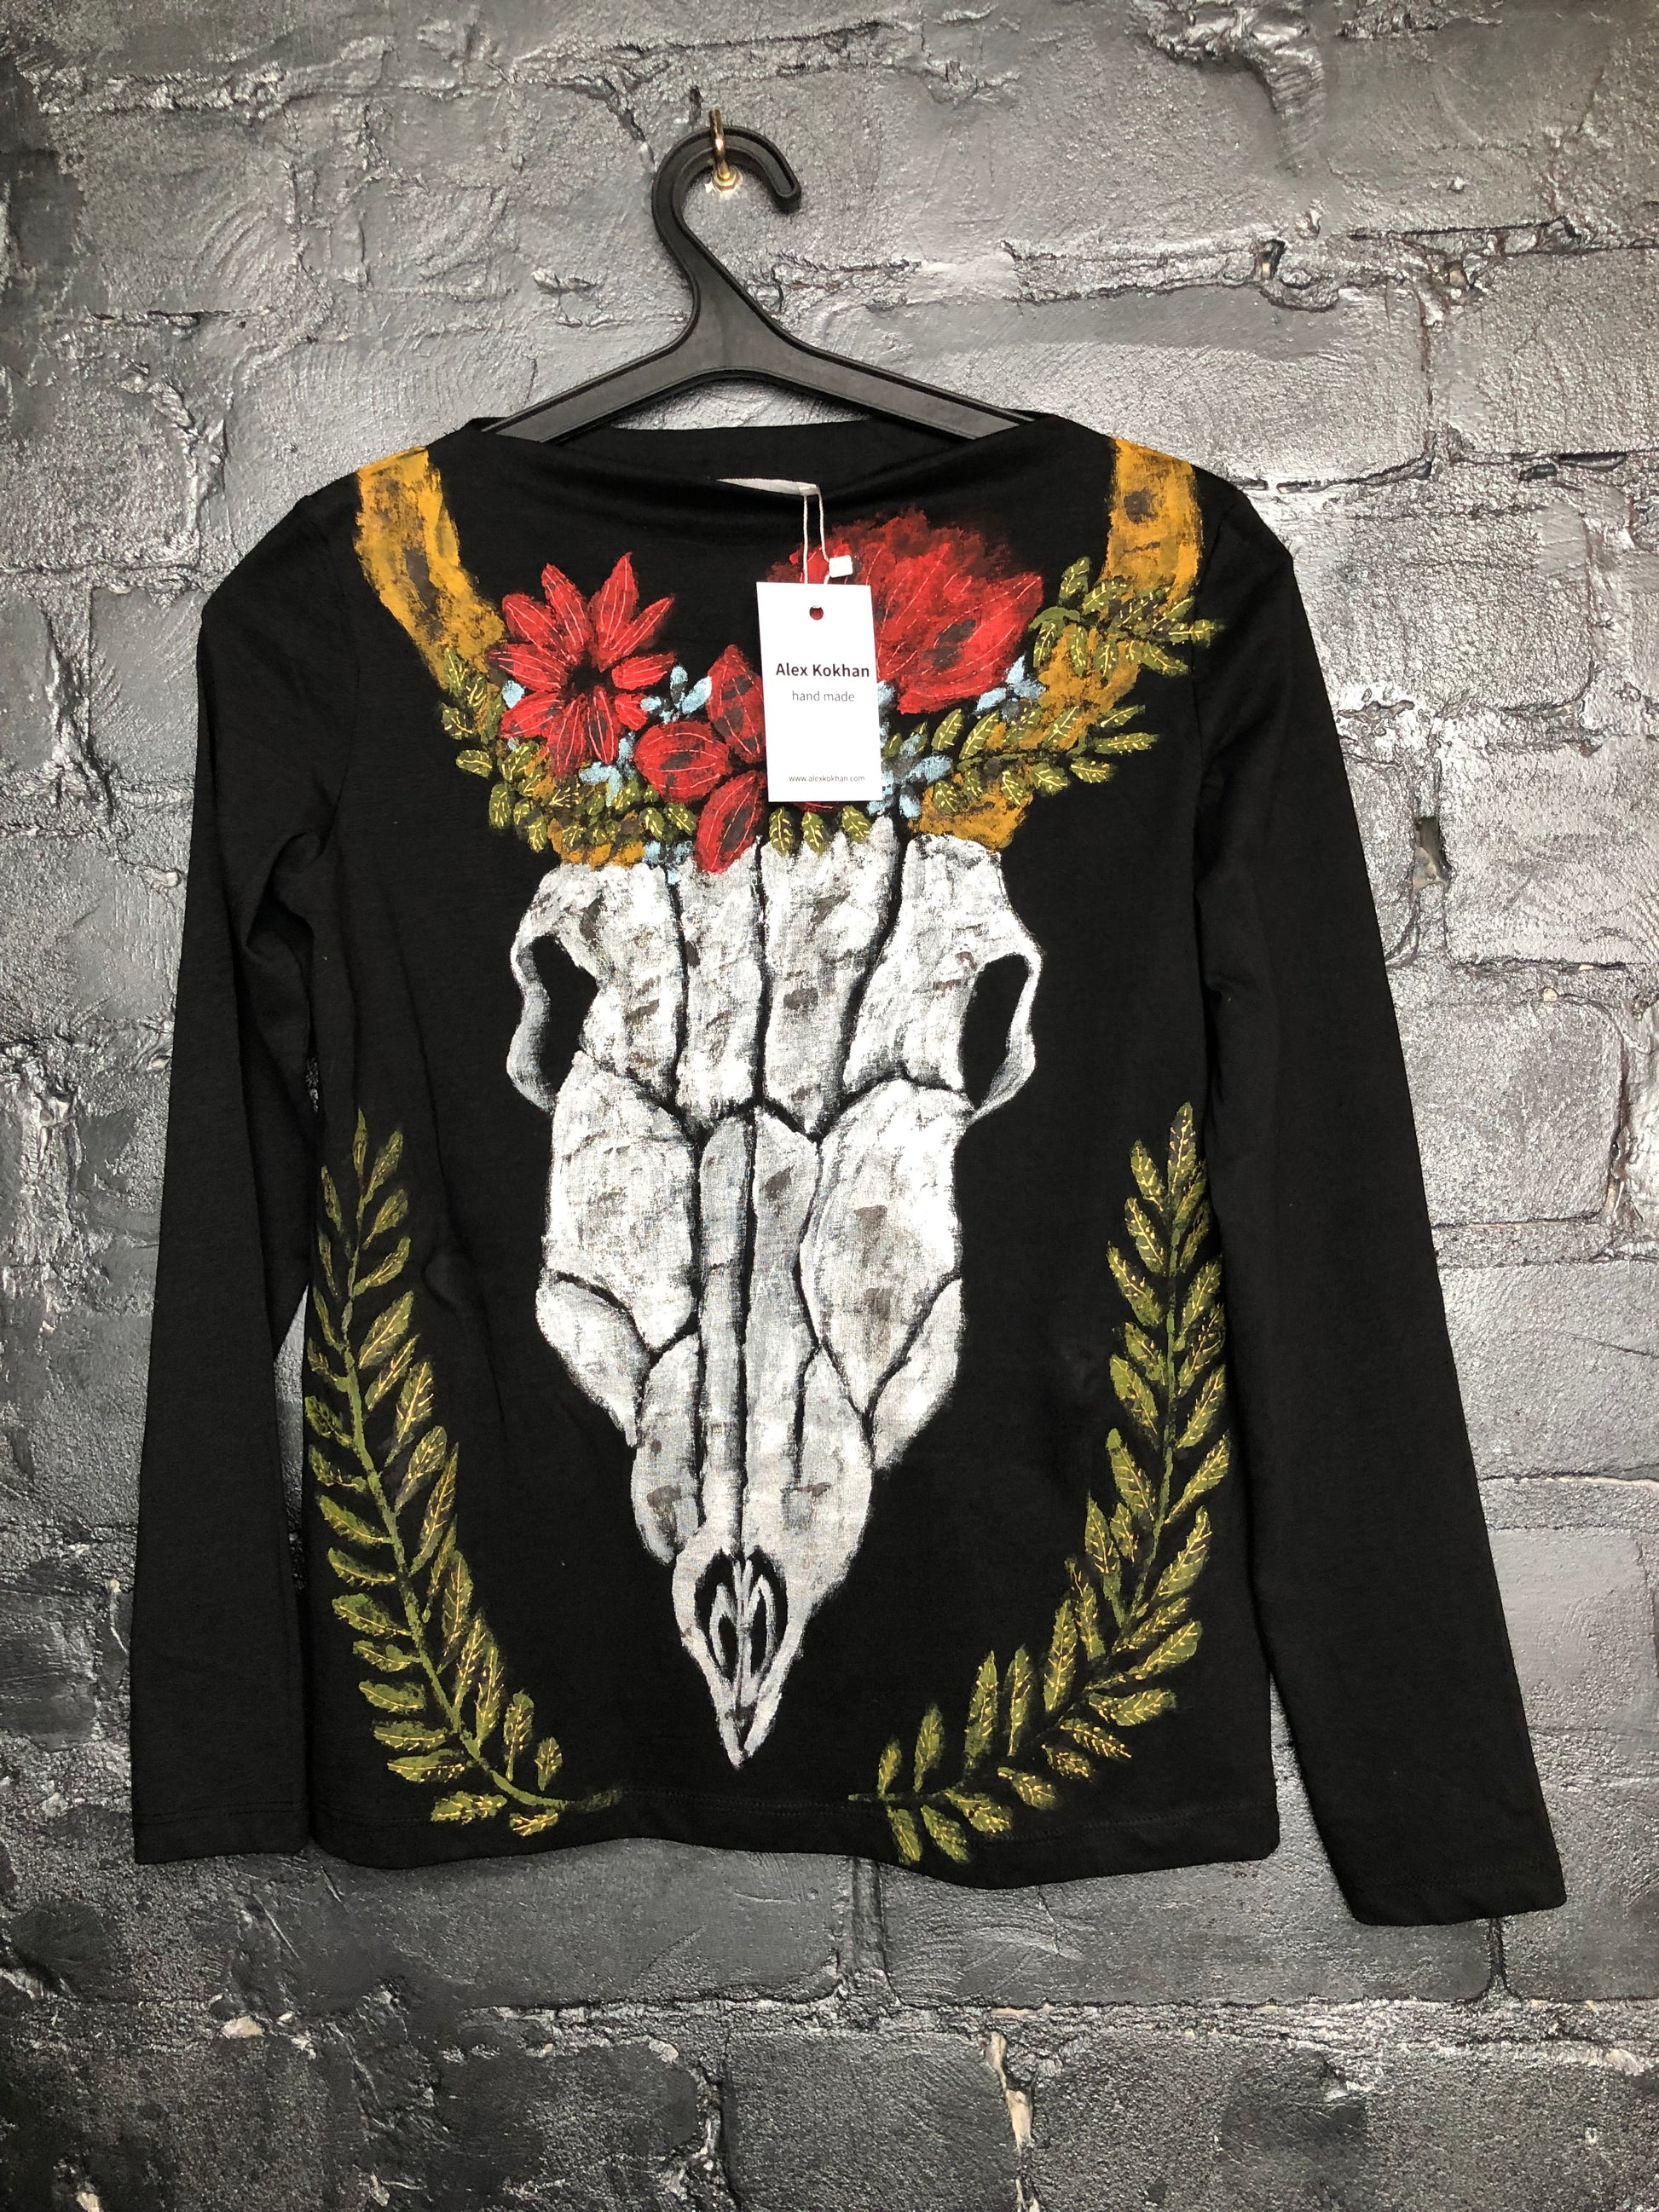 Women's long sleeve black T-shirt with a pattern of a skull, horns, leaves and flowers.